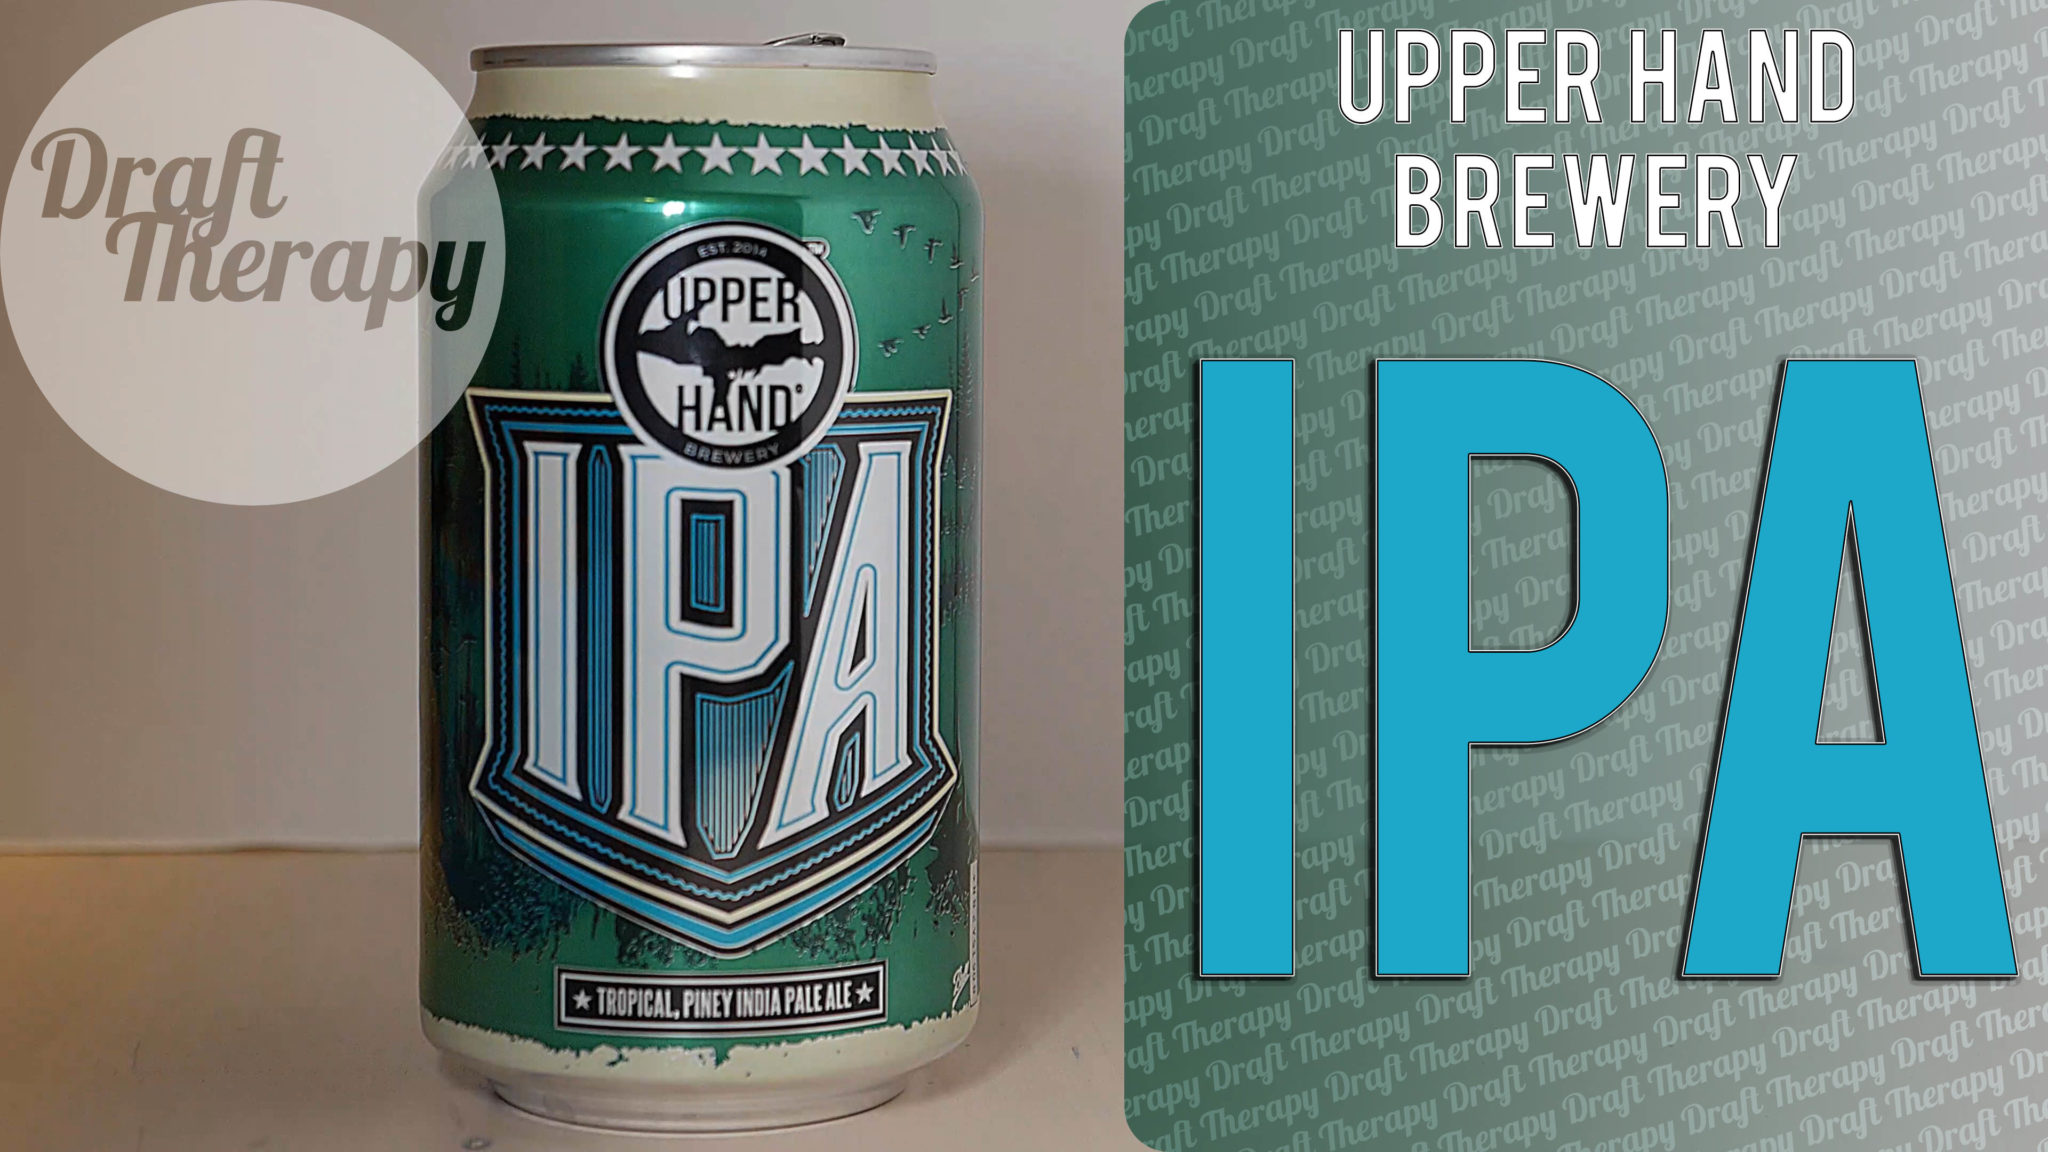 You are currently viewing Upper Hand Brewery – An IPA from the UP Division of Bell’s